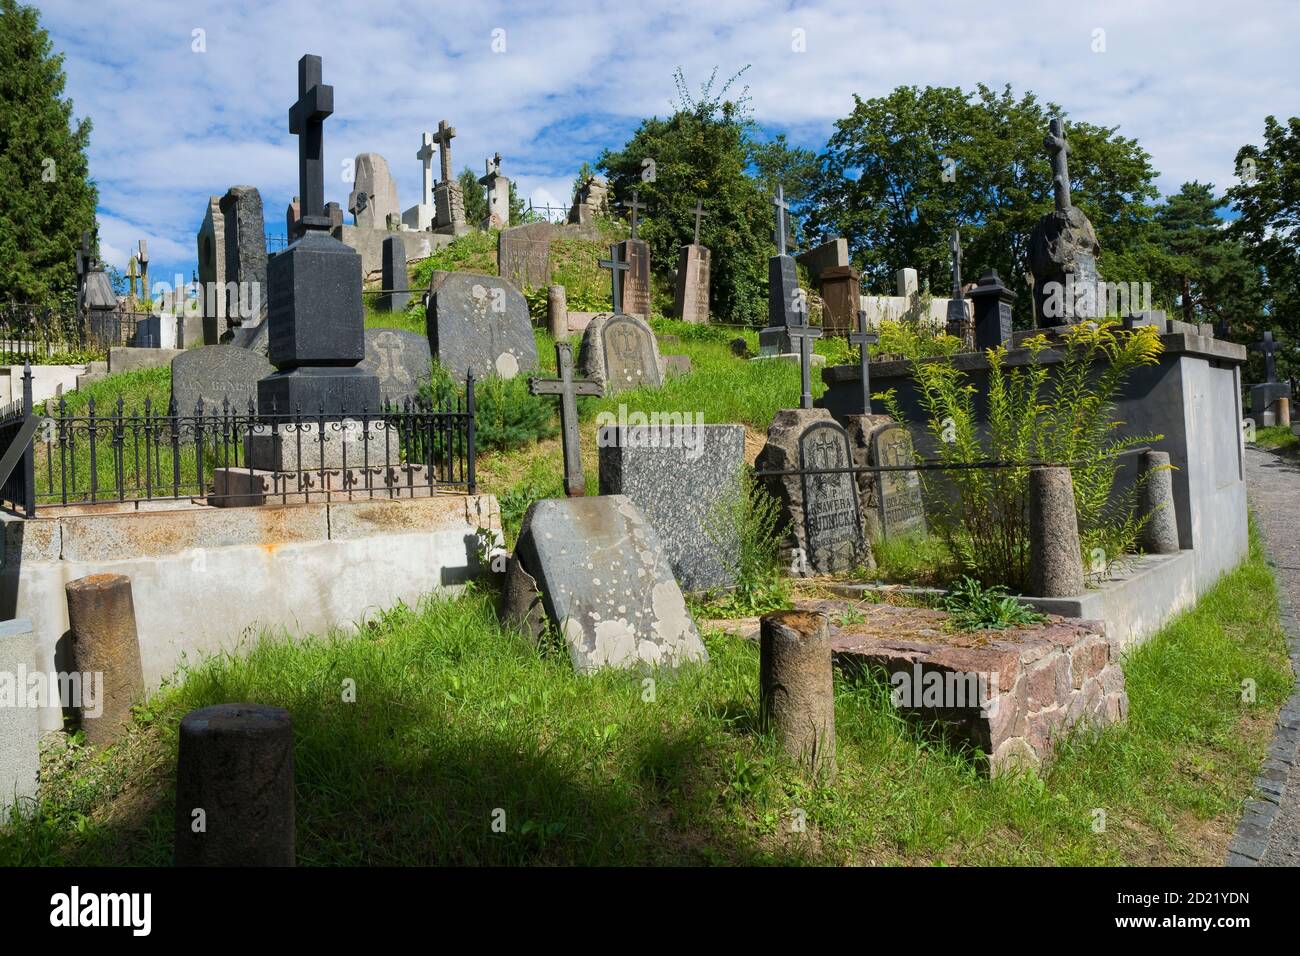 Rasos Cemetery - the oldest and most famous cemetery in the city of Vilnius, Lithuania Stock Photo